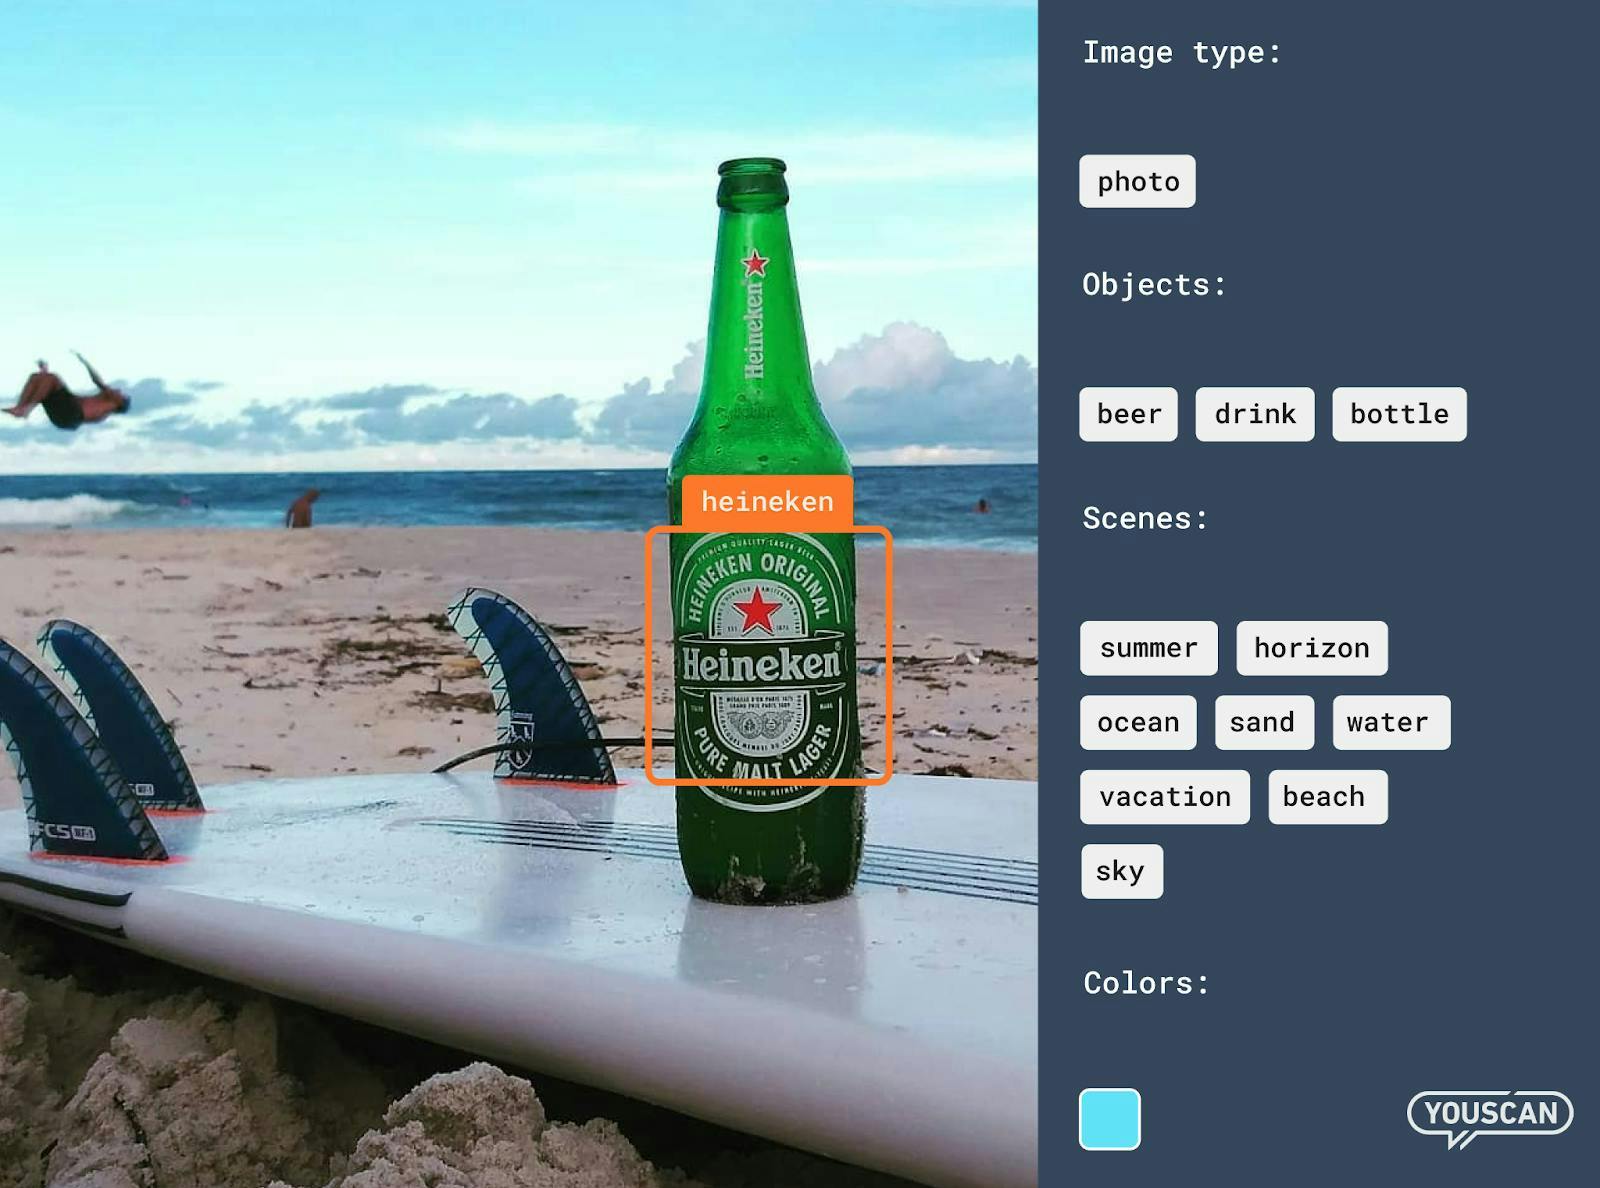 youscan image analysis with green heineken bottle on a surfboard at the beach